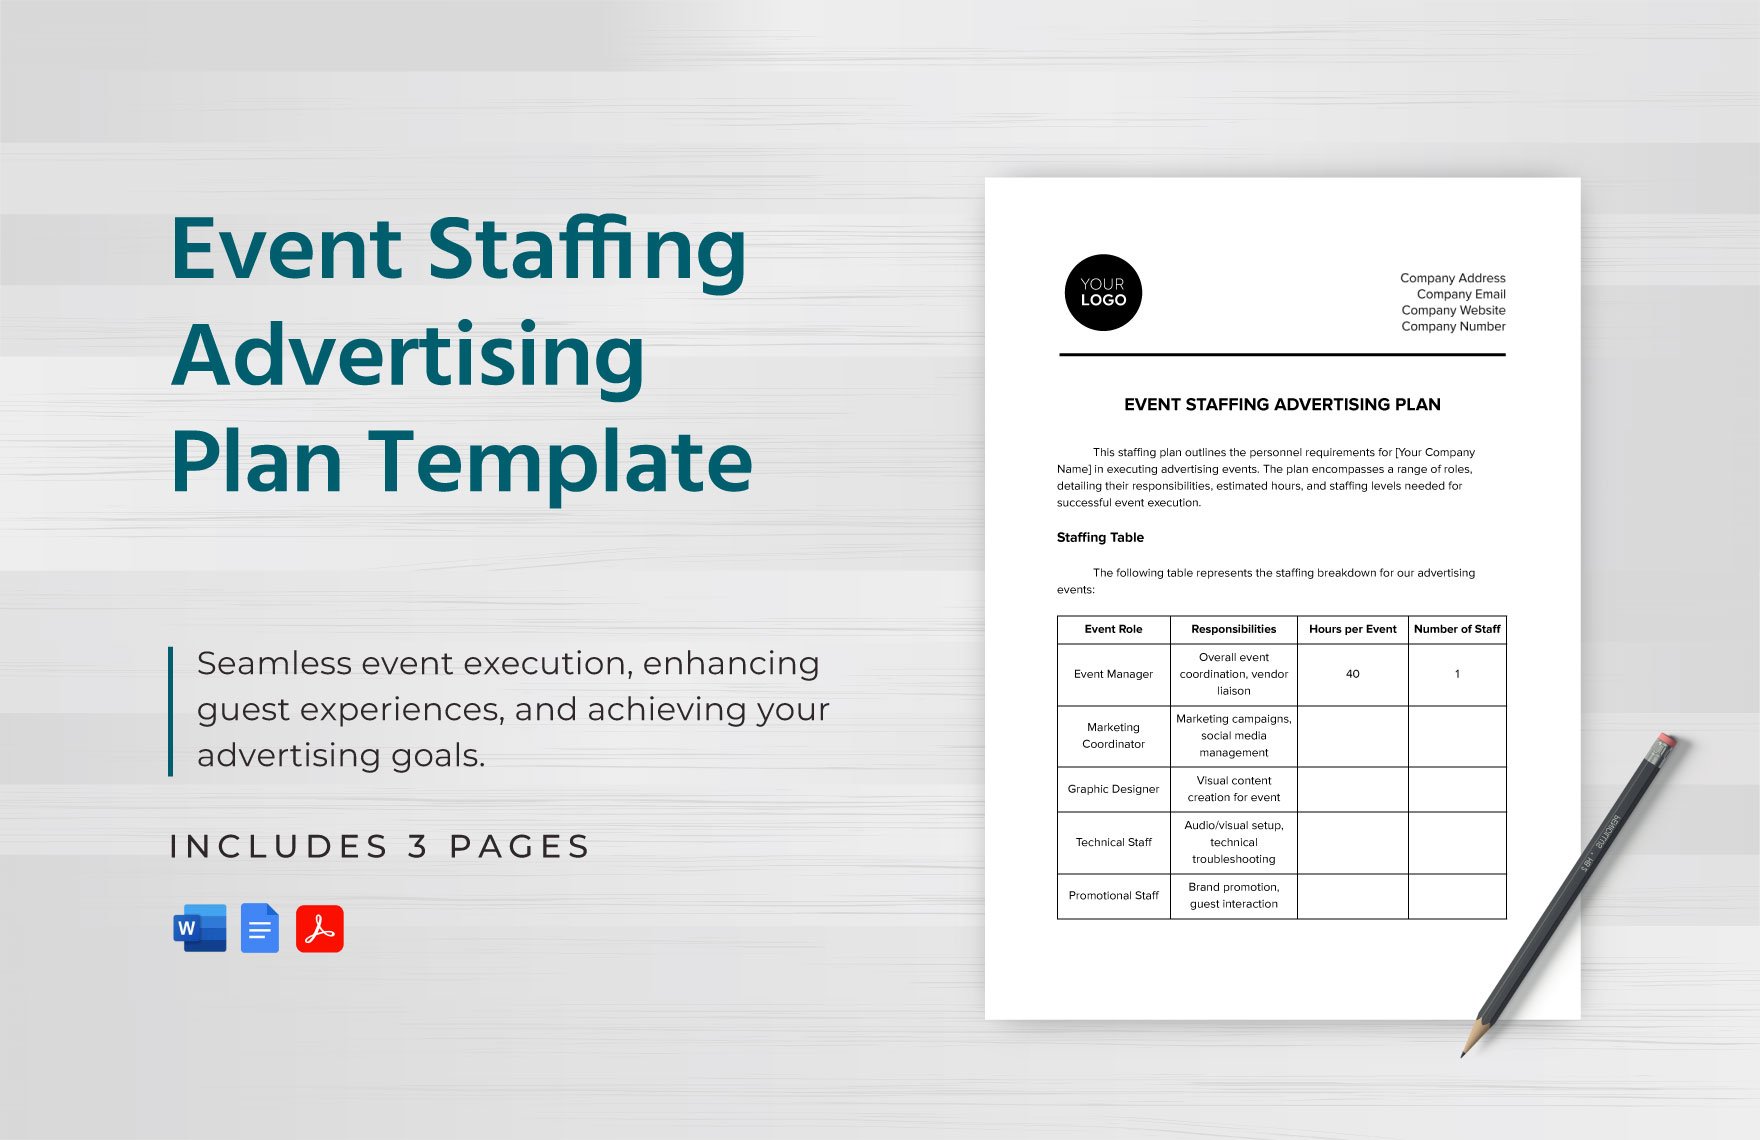 Event Staffing Advertising Plan Template